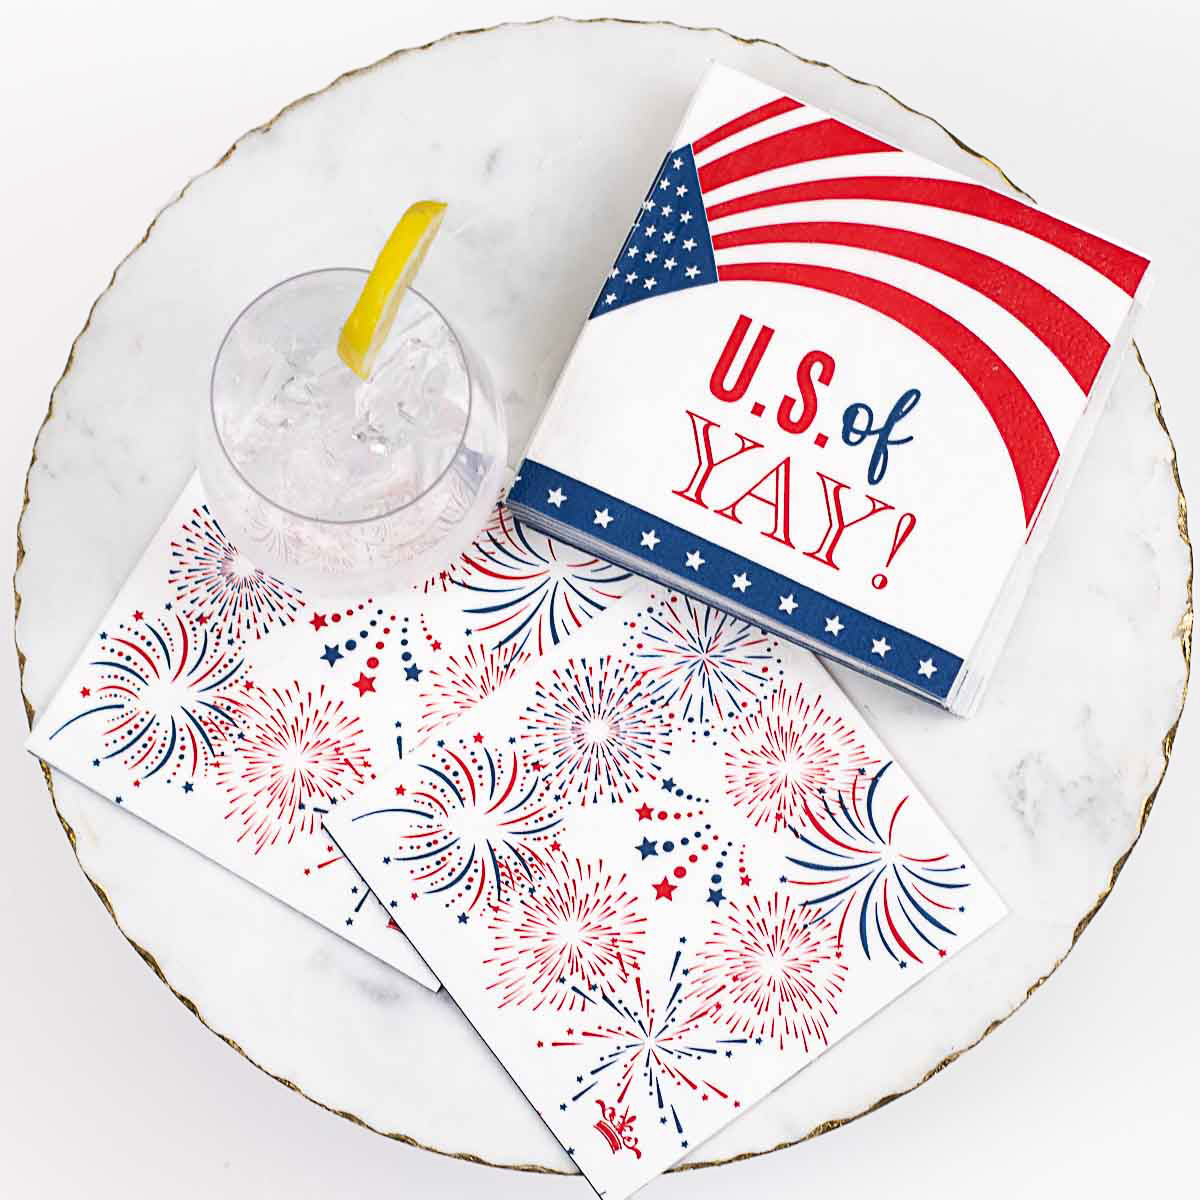 U.S. Of Yay Cocktail Napkins (Pack of 20)